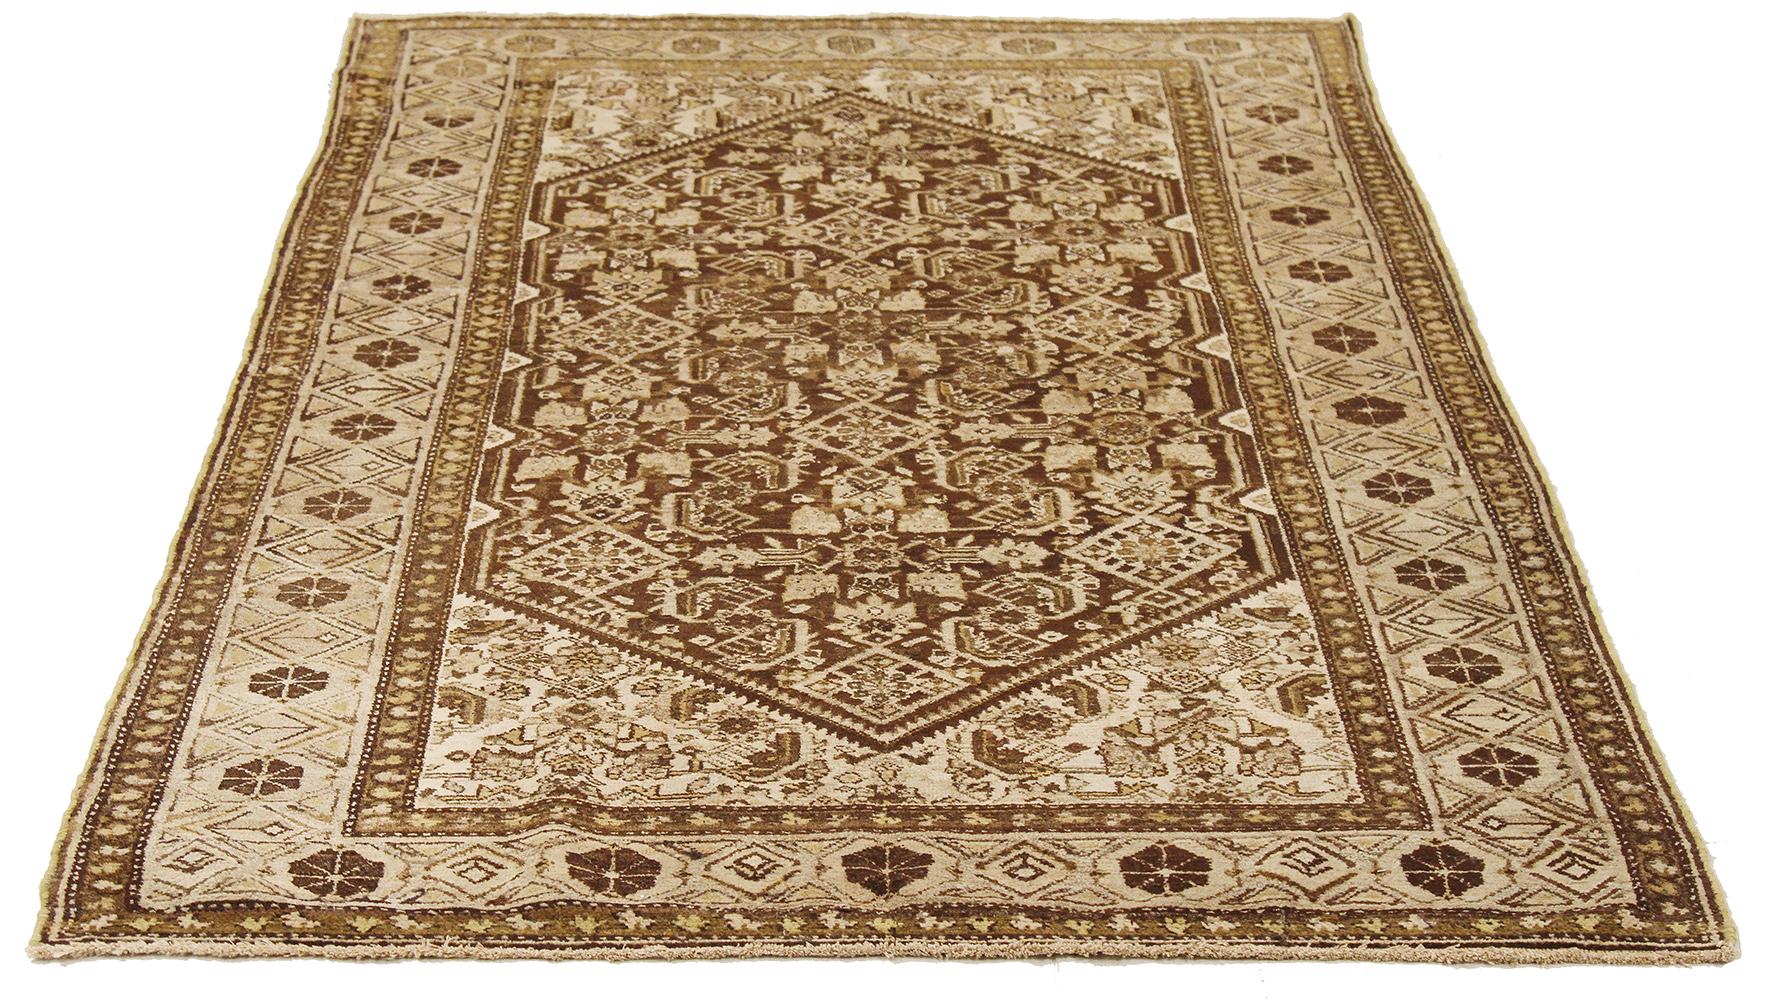 Antique Persian rug handwoven from the finest sheep’s wool and colored with all-natural vegetable dyes that are safe for humans and pets. It’s a traditional Malayer design featuring a mix of floral and geometric details in beige and brown on an